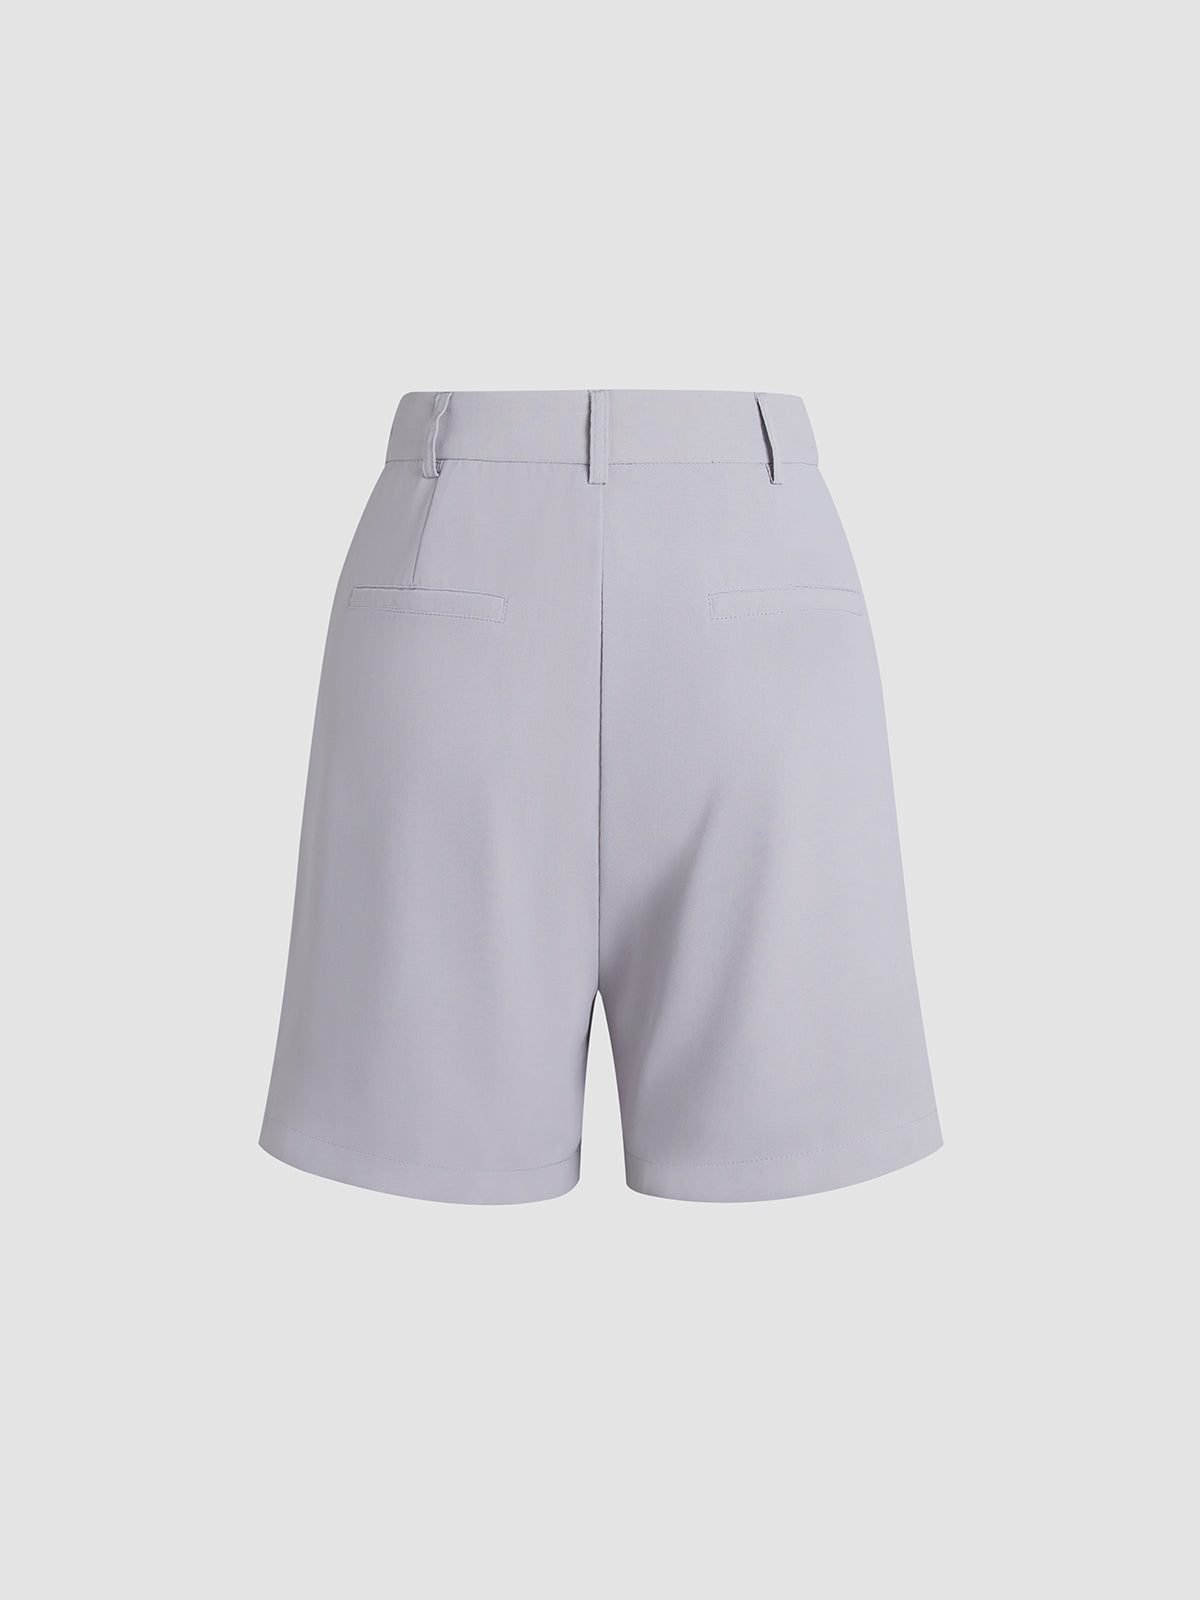 High Waisted Mid Thigh Trouser Shorts